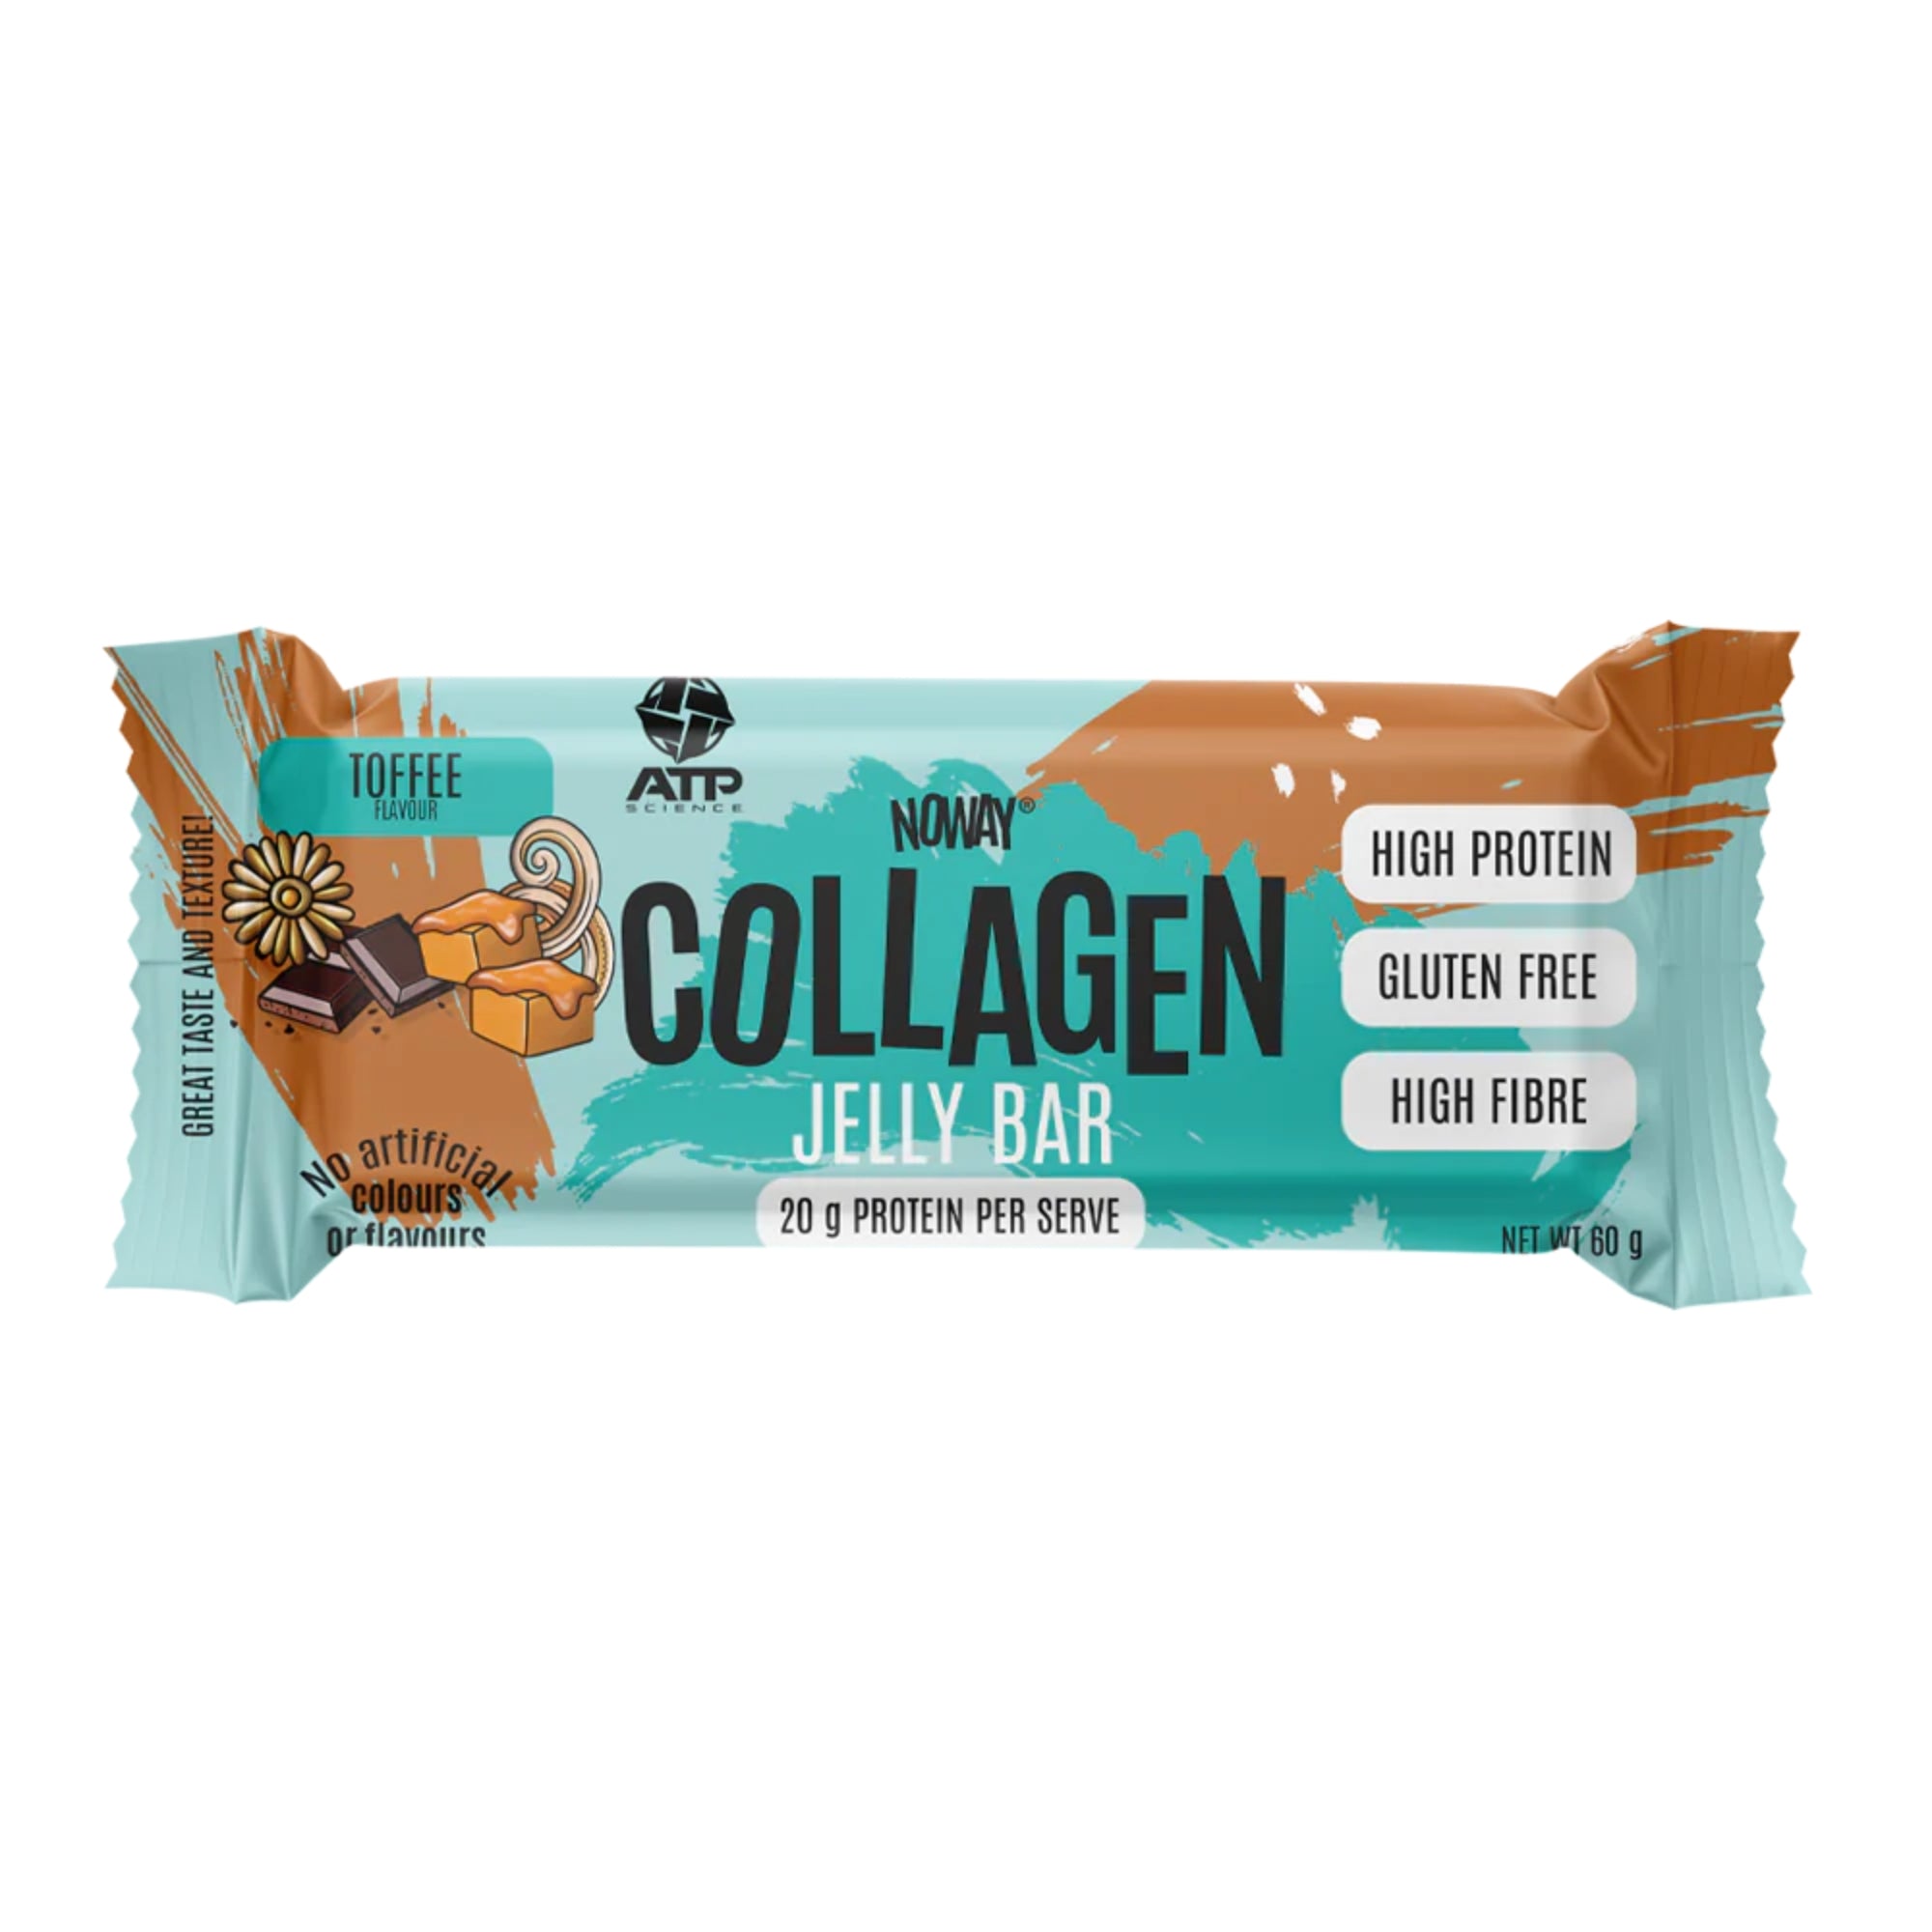 NoWay Collagen Jelly Bar - Toffee Single